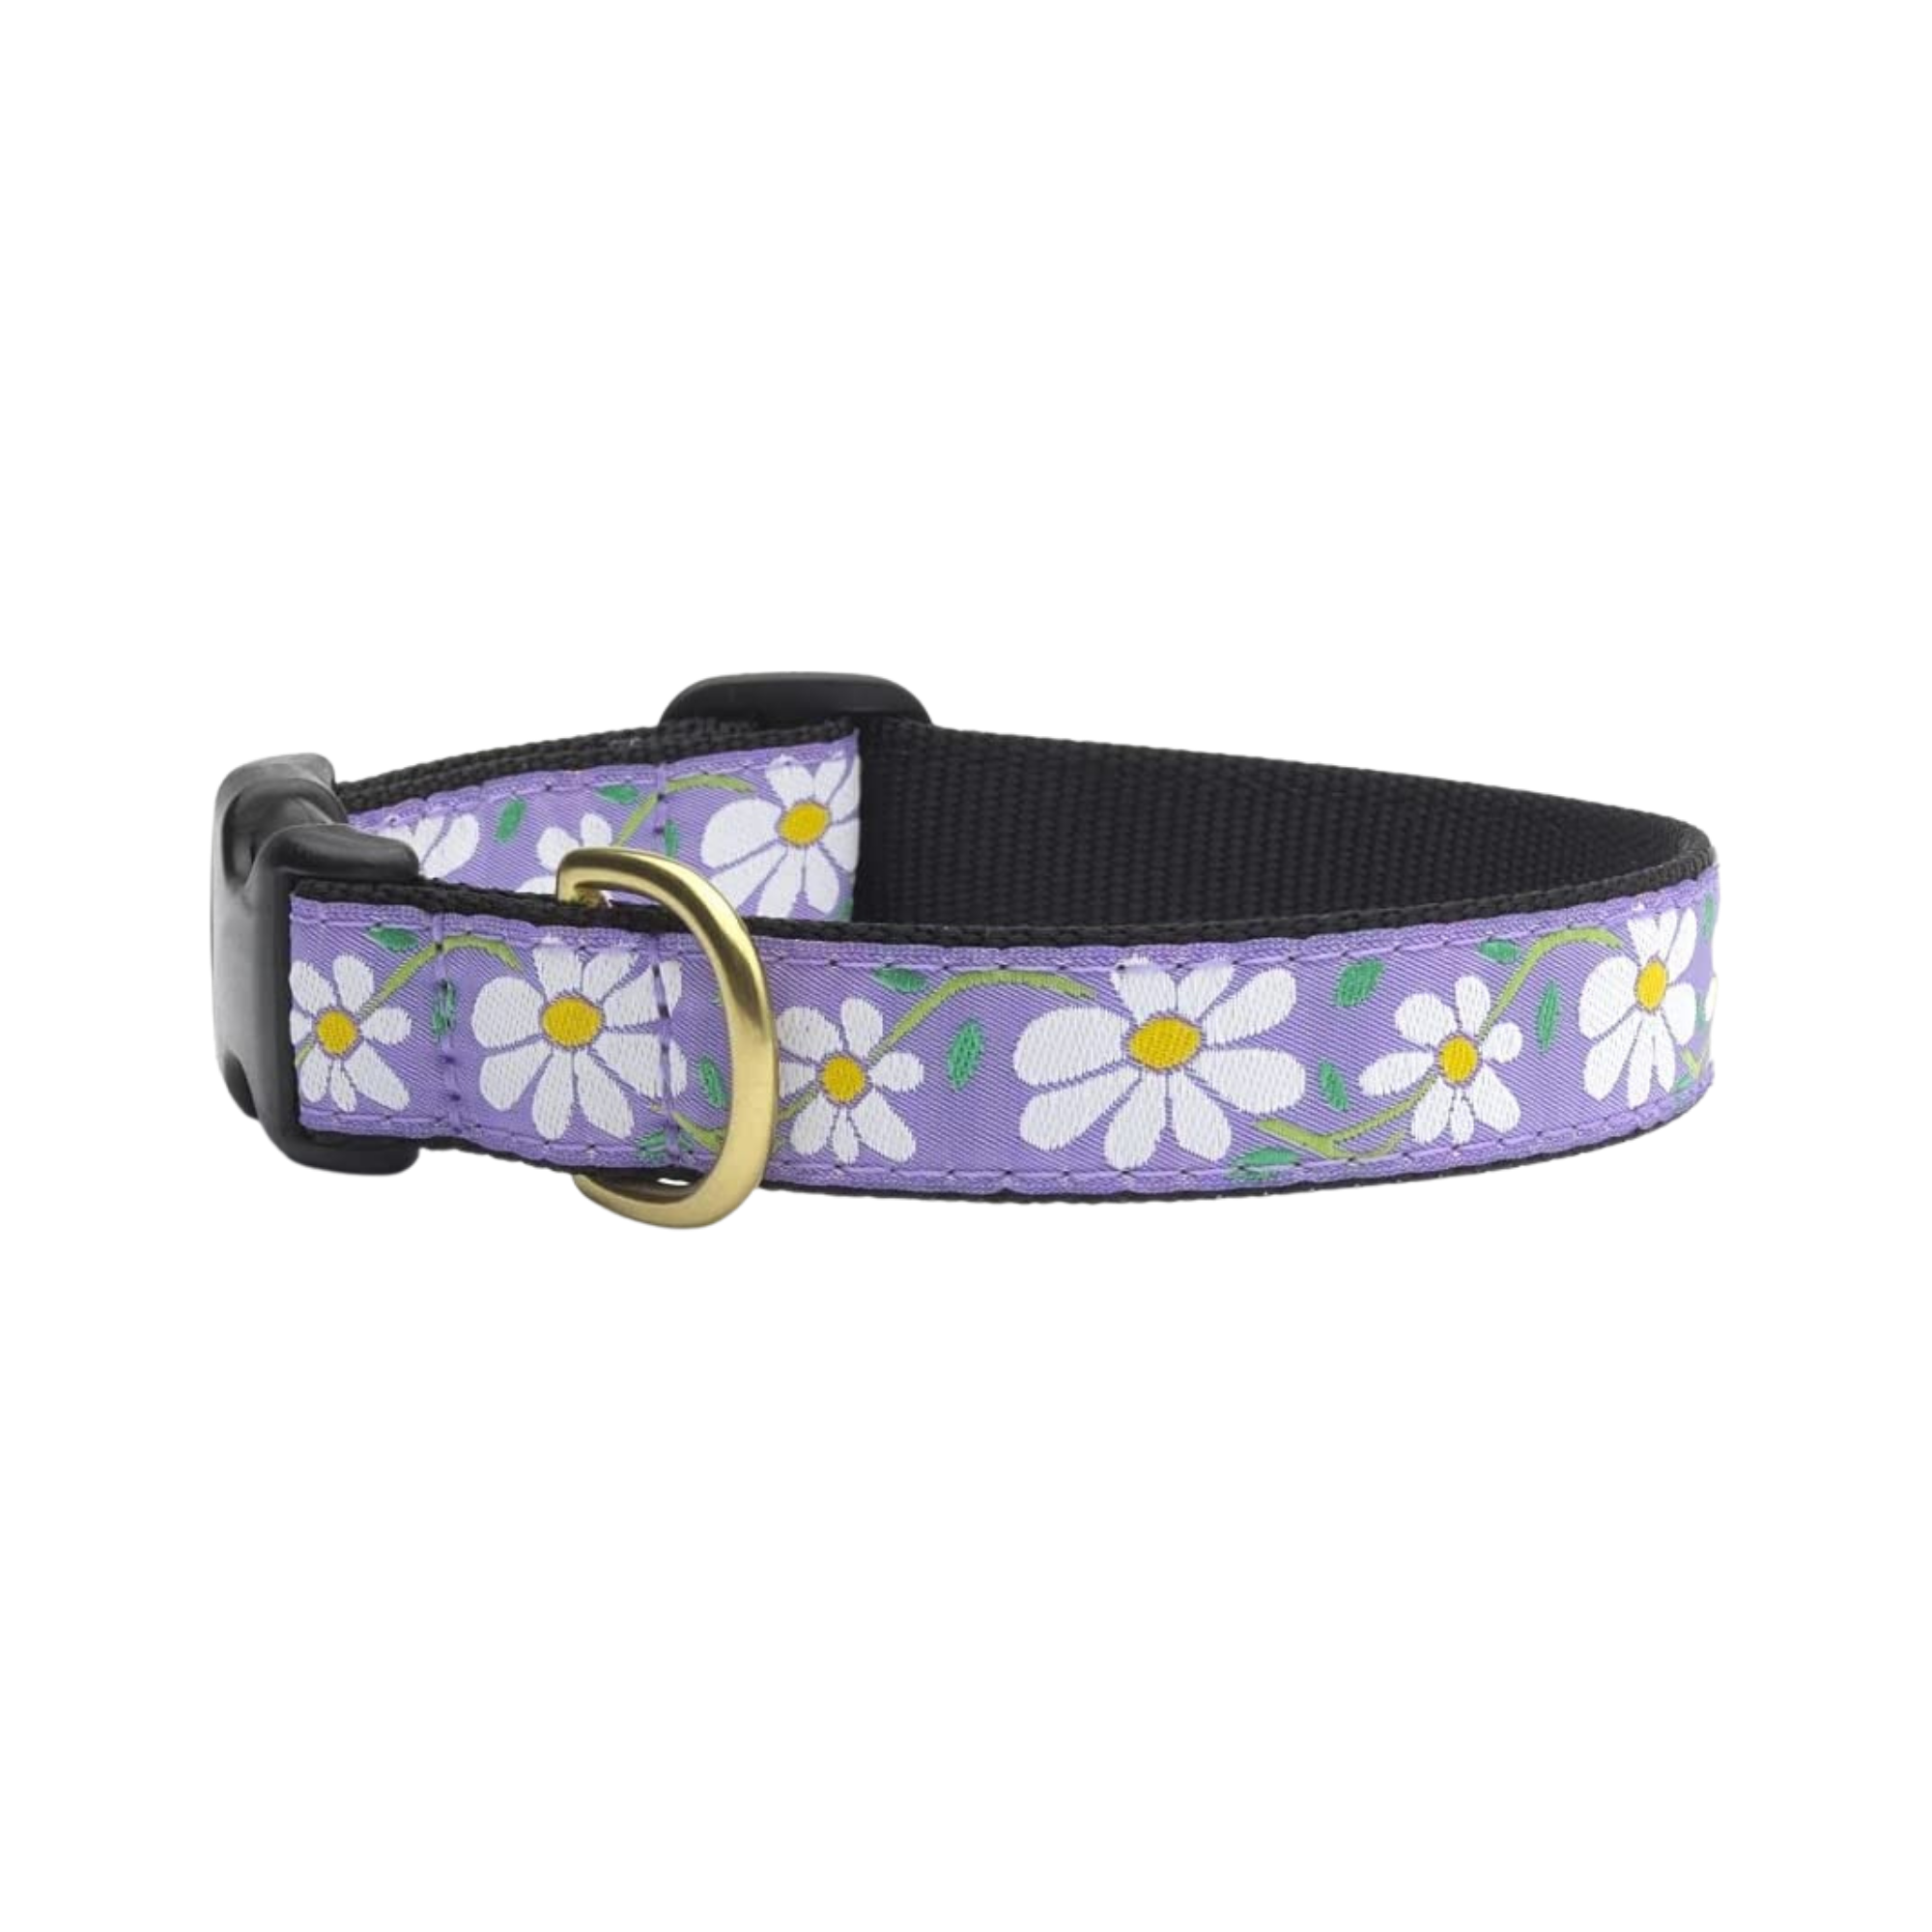 Up Country Daisy Dog Collar - Mutts & Co.